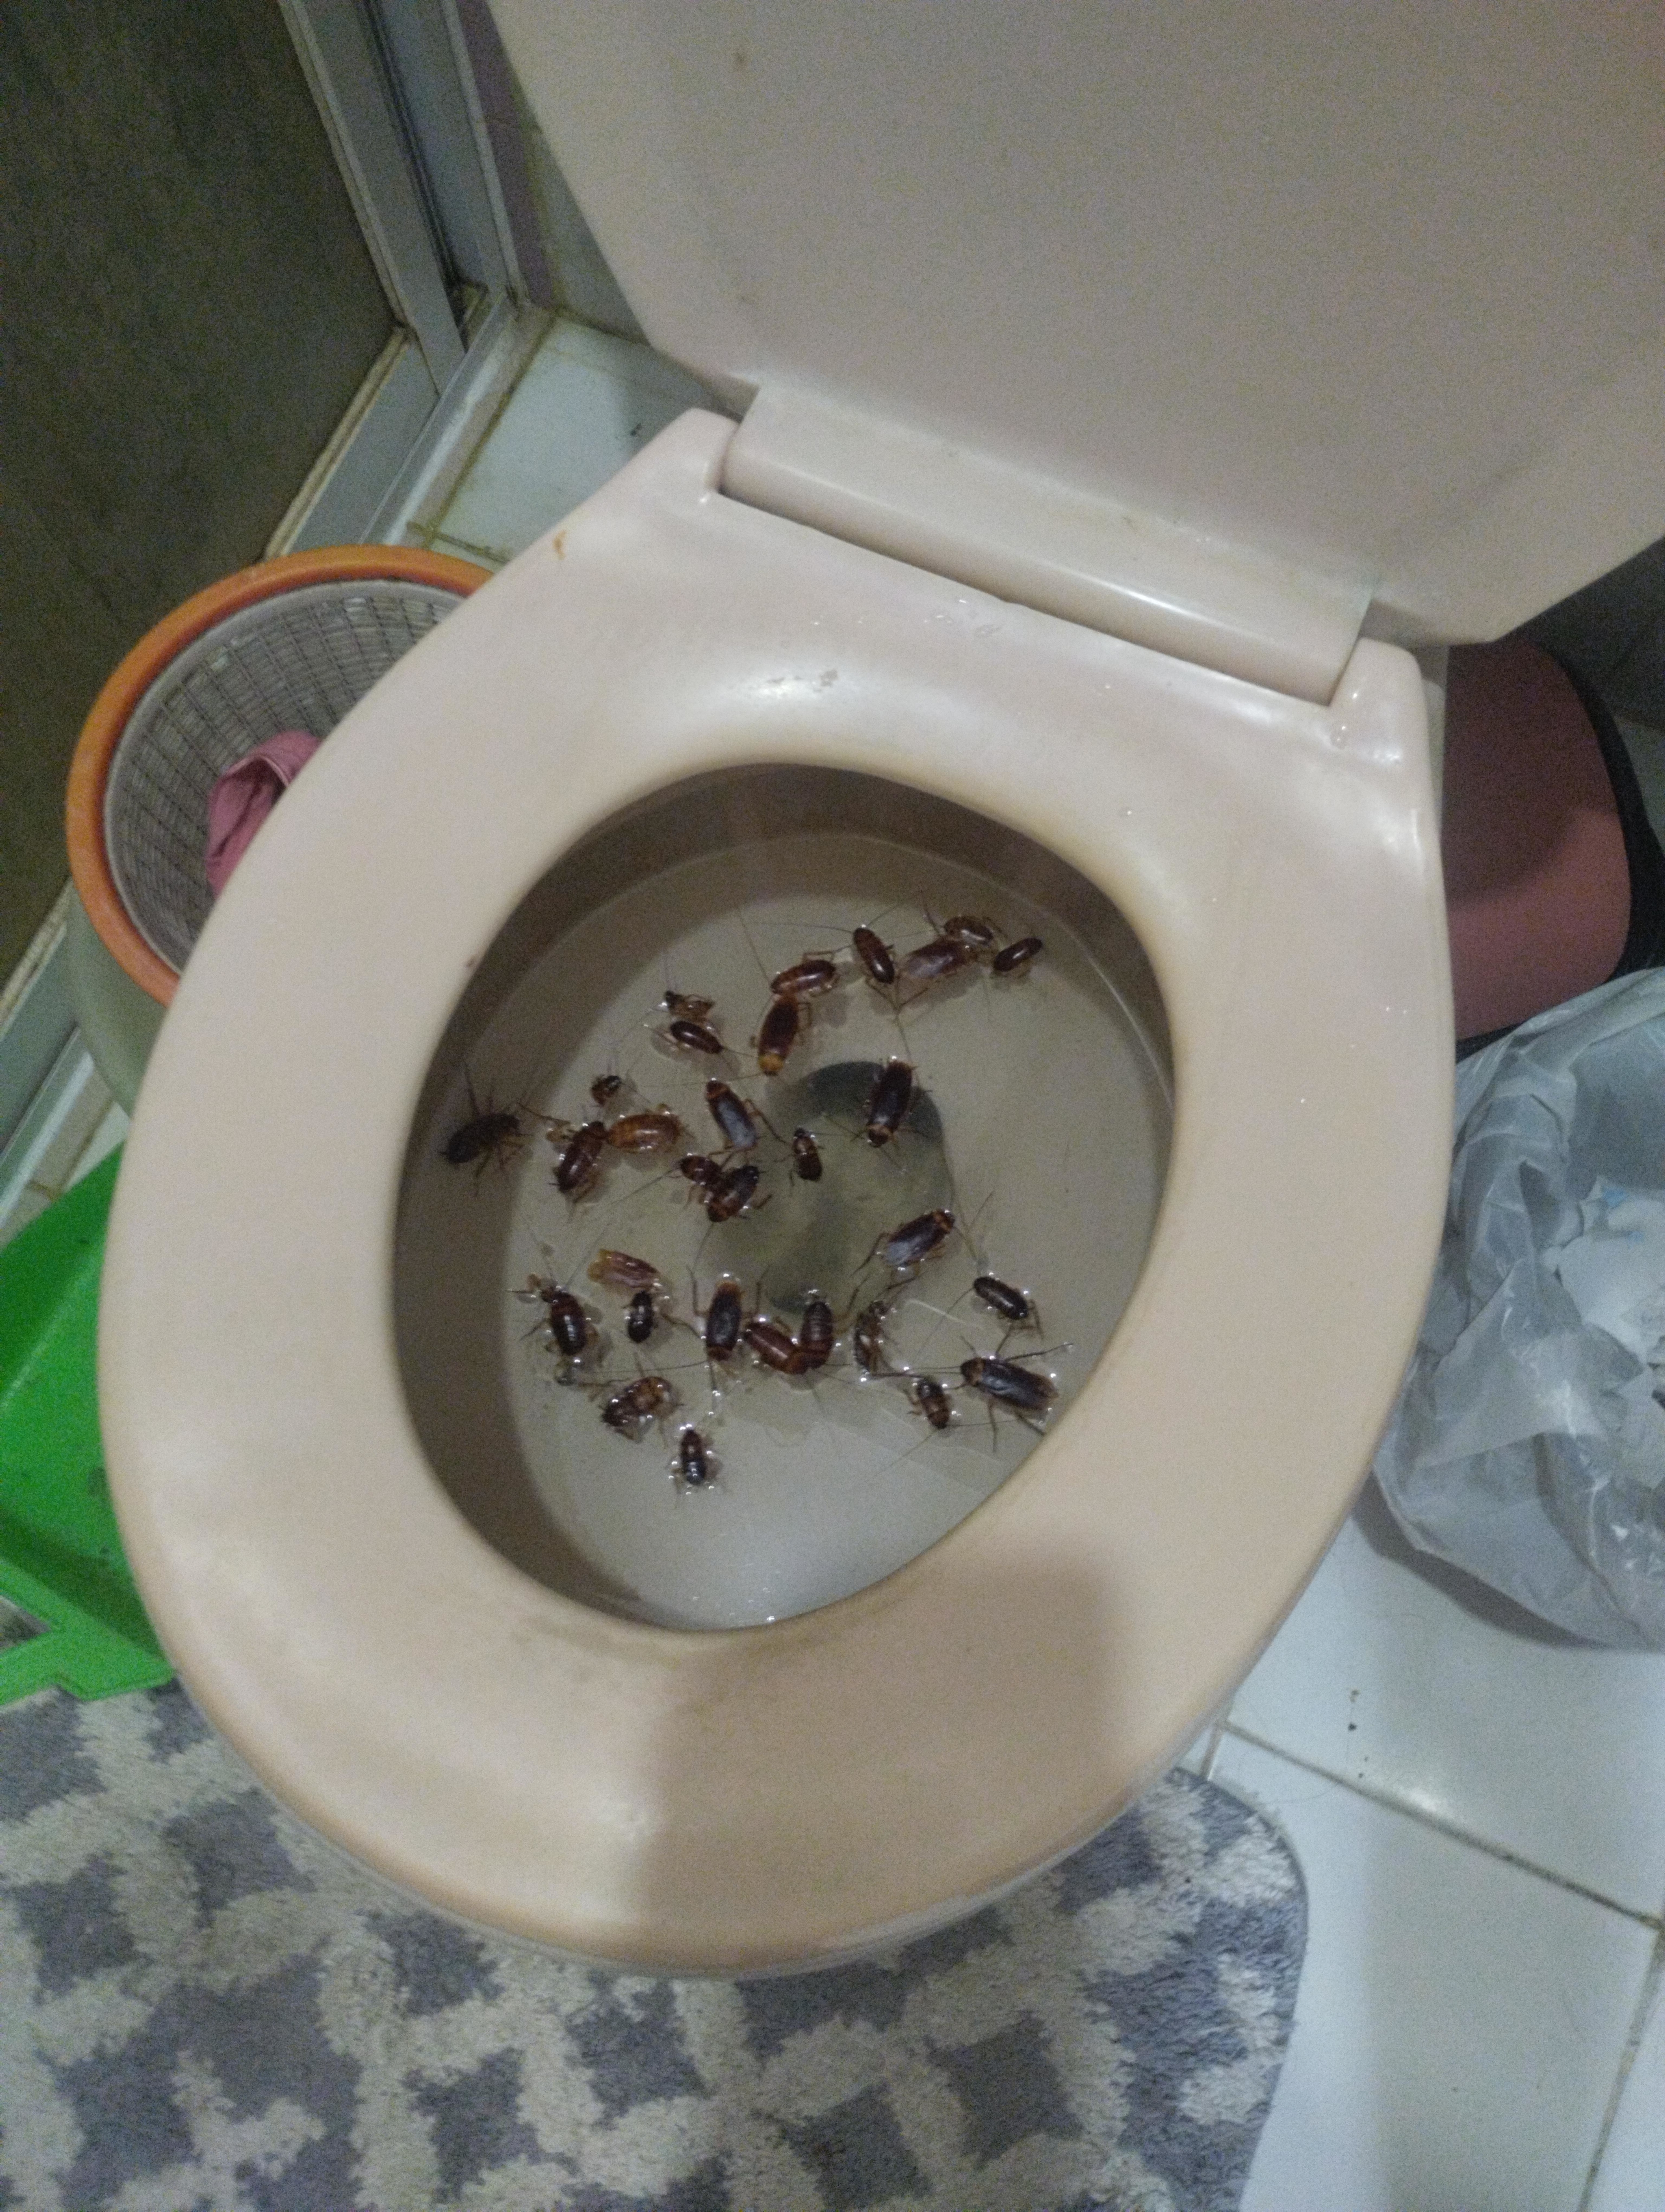 A toilet bowl filled with roaches